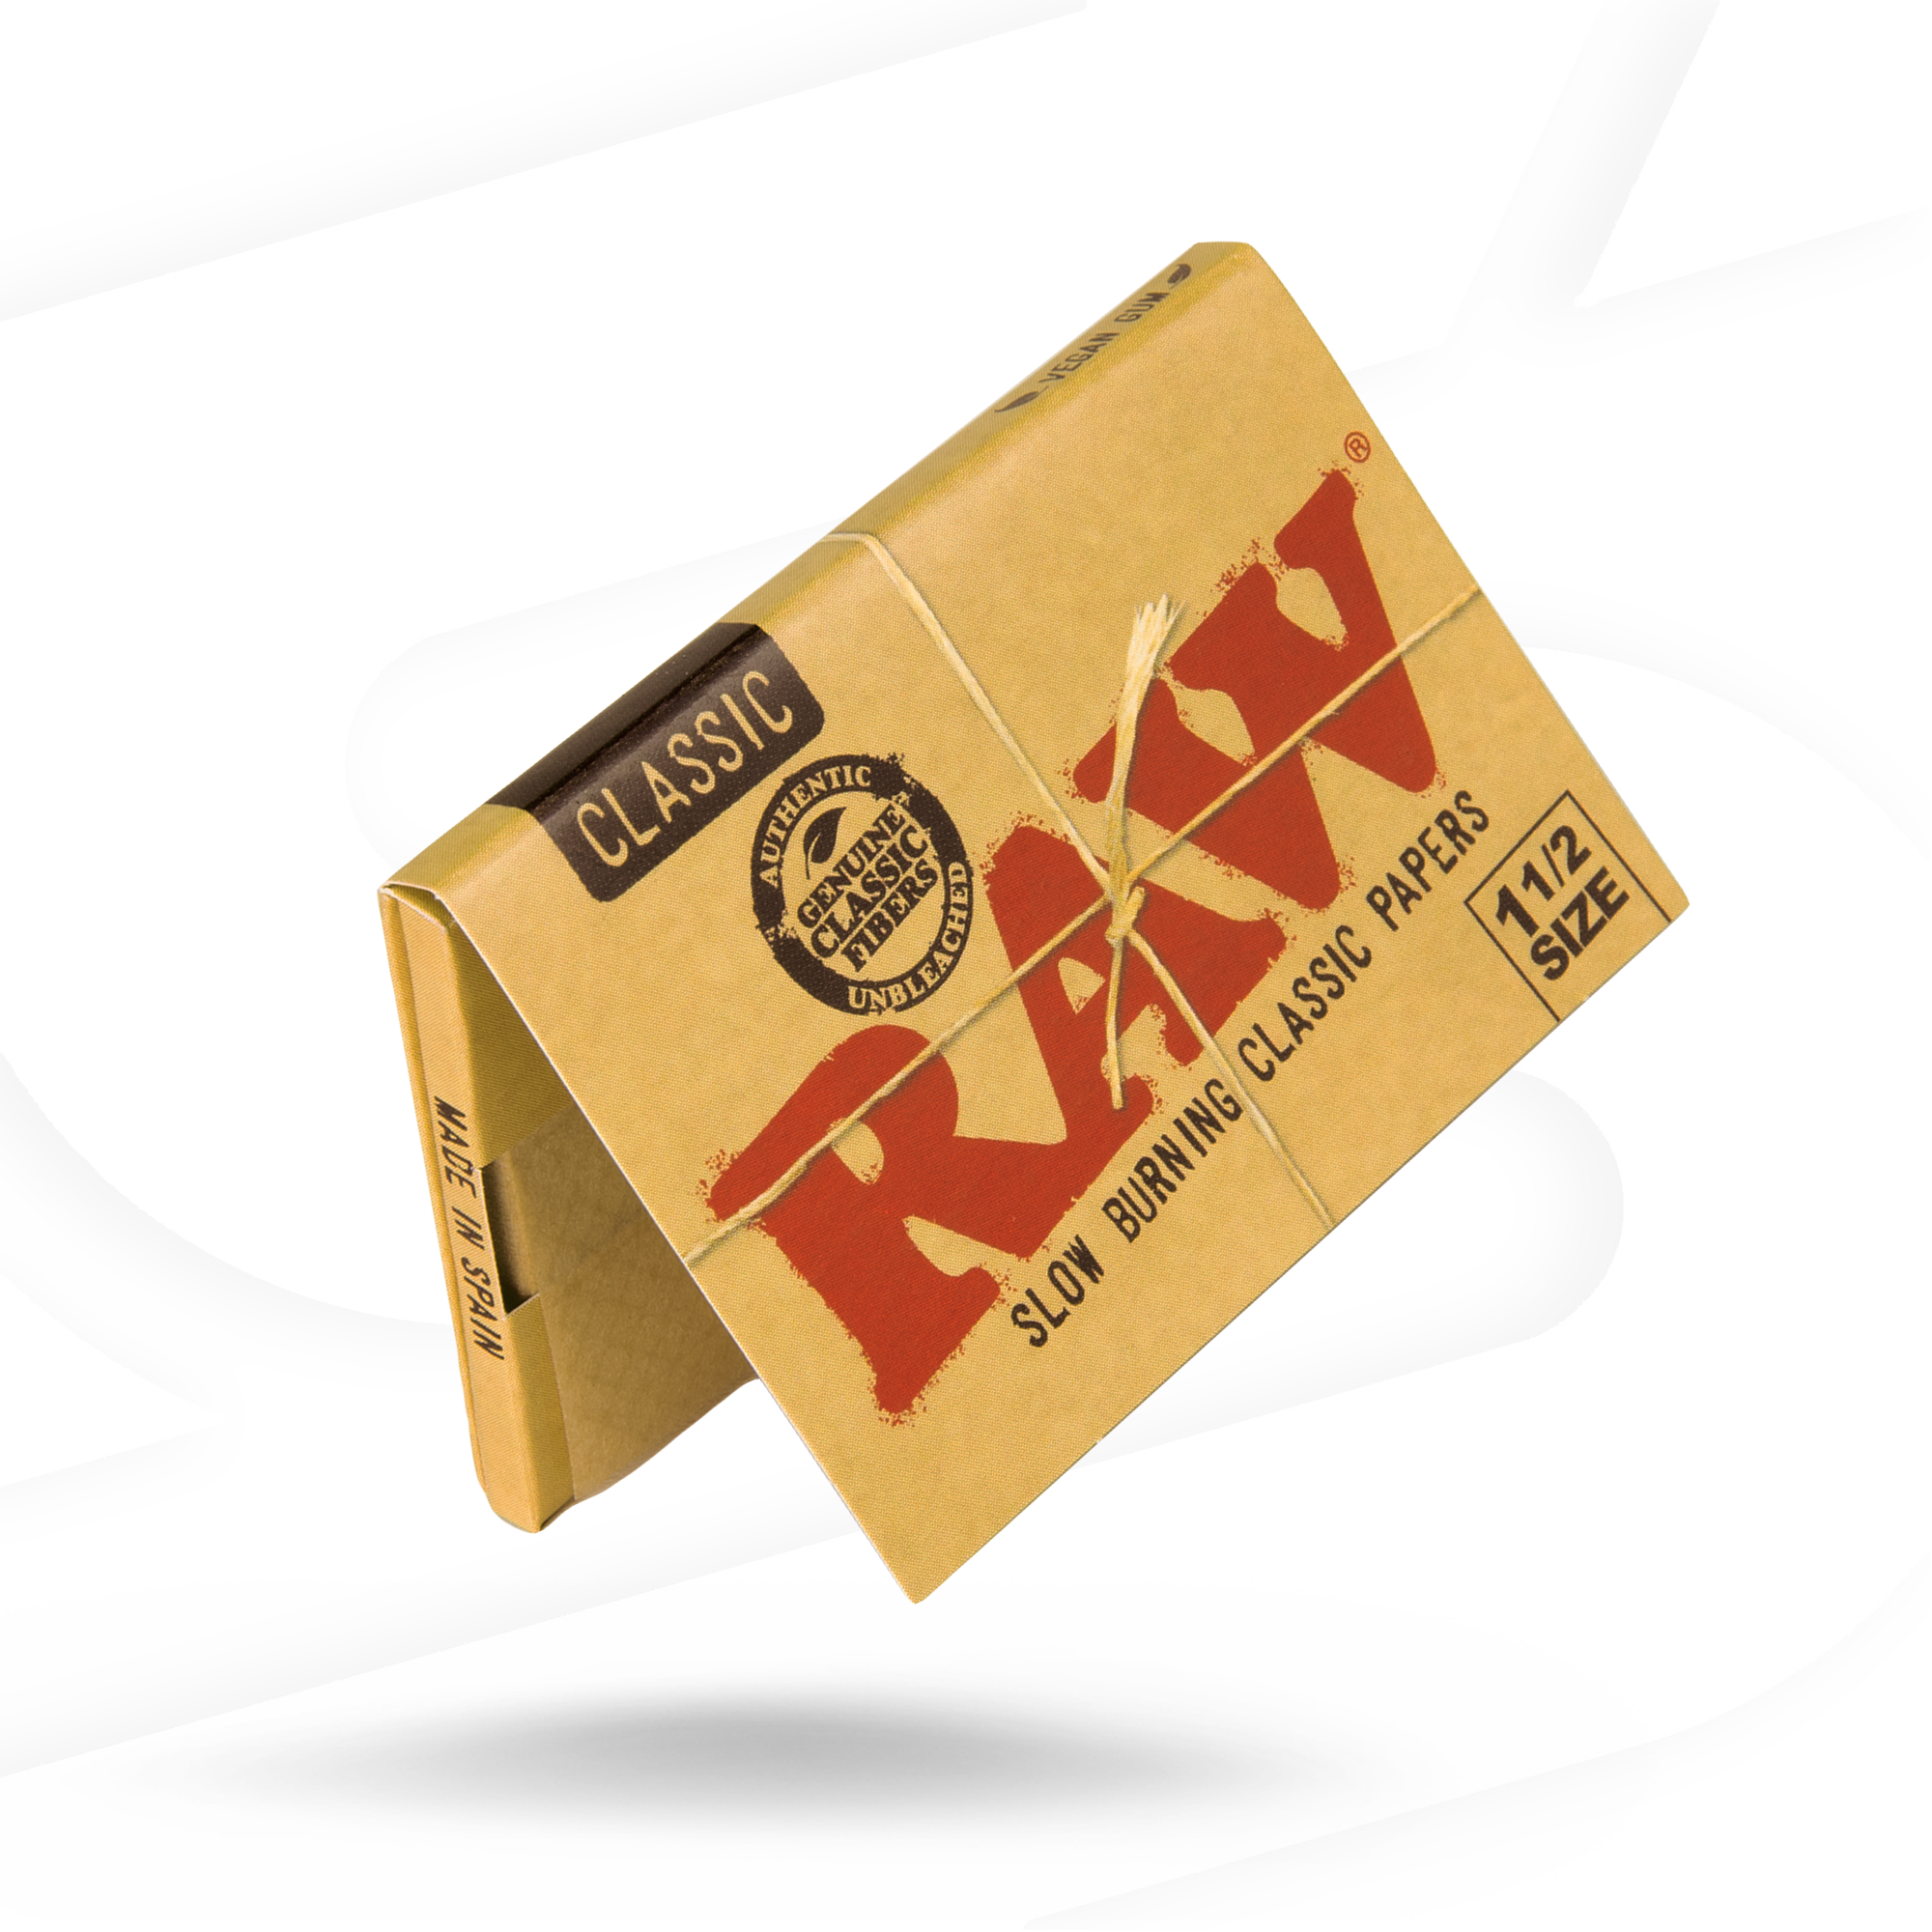 RAW Rolling Papers Core T-Shirt - ESD Official